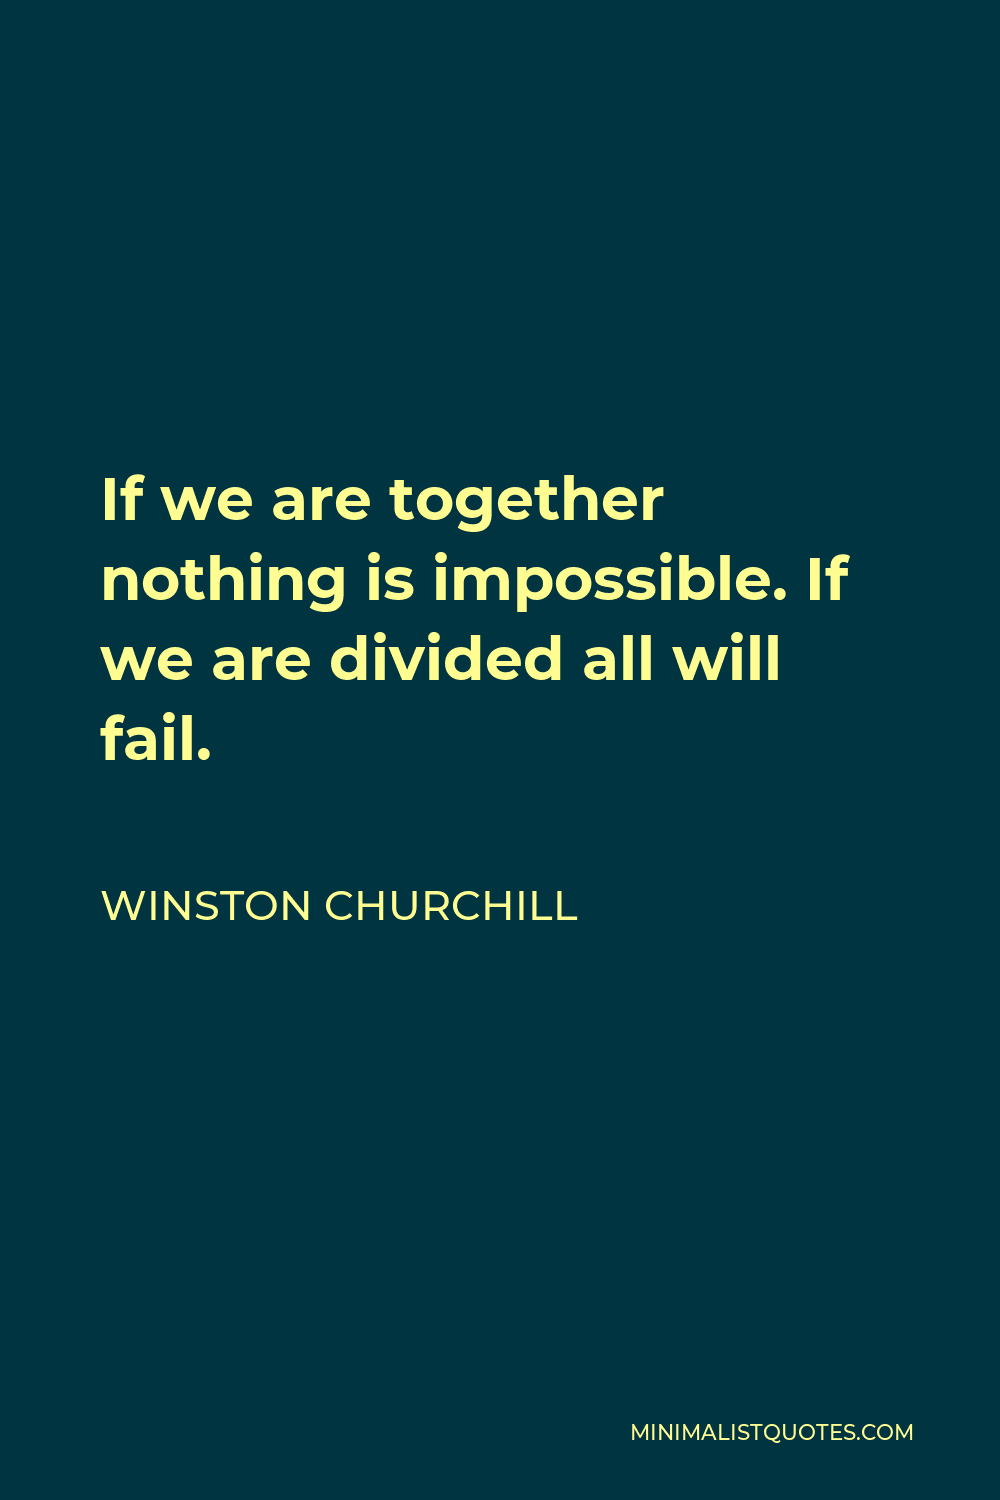 Winston Churchill Quote - If we are together nothing is impossible. If we are divided all will fail.